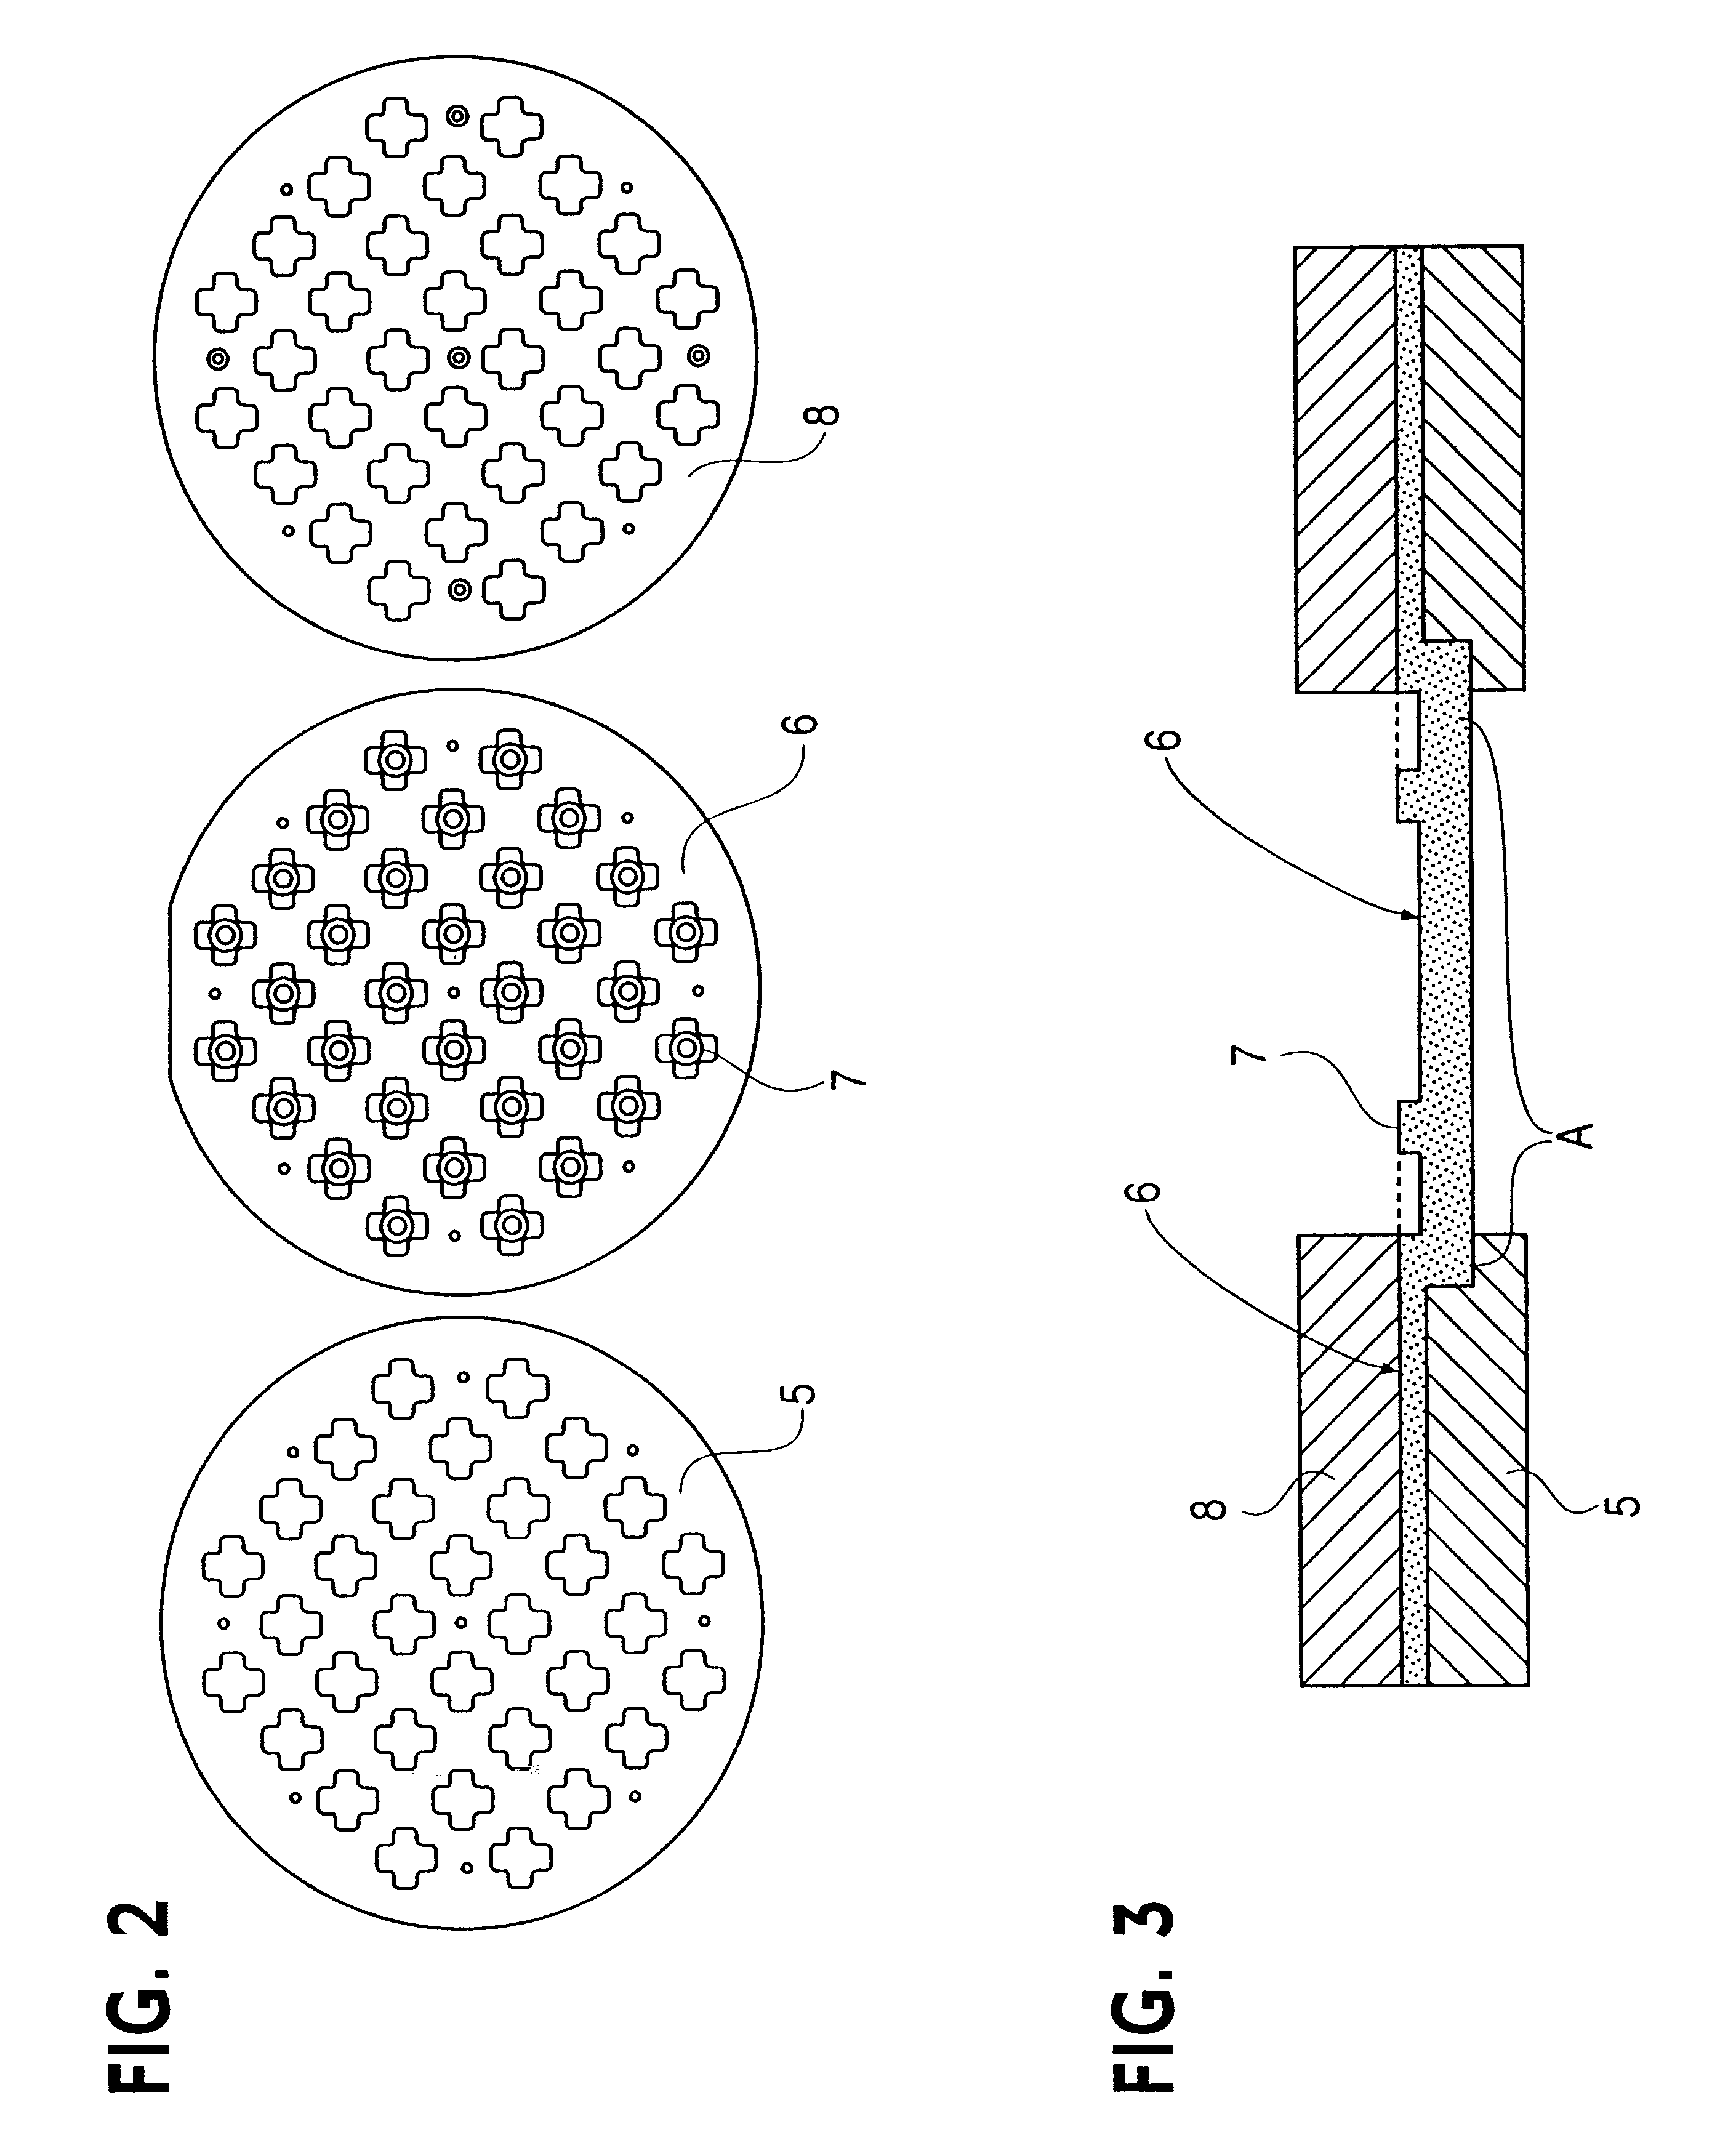 Piezoelectric resonator, process for the fabrication thereof including its use as a sensor element for the determination of the concentration of a substance contained in a liquid and/or for the determination of the physical properties of the liquid